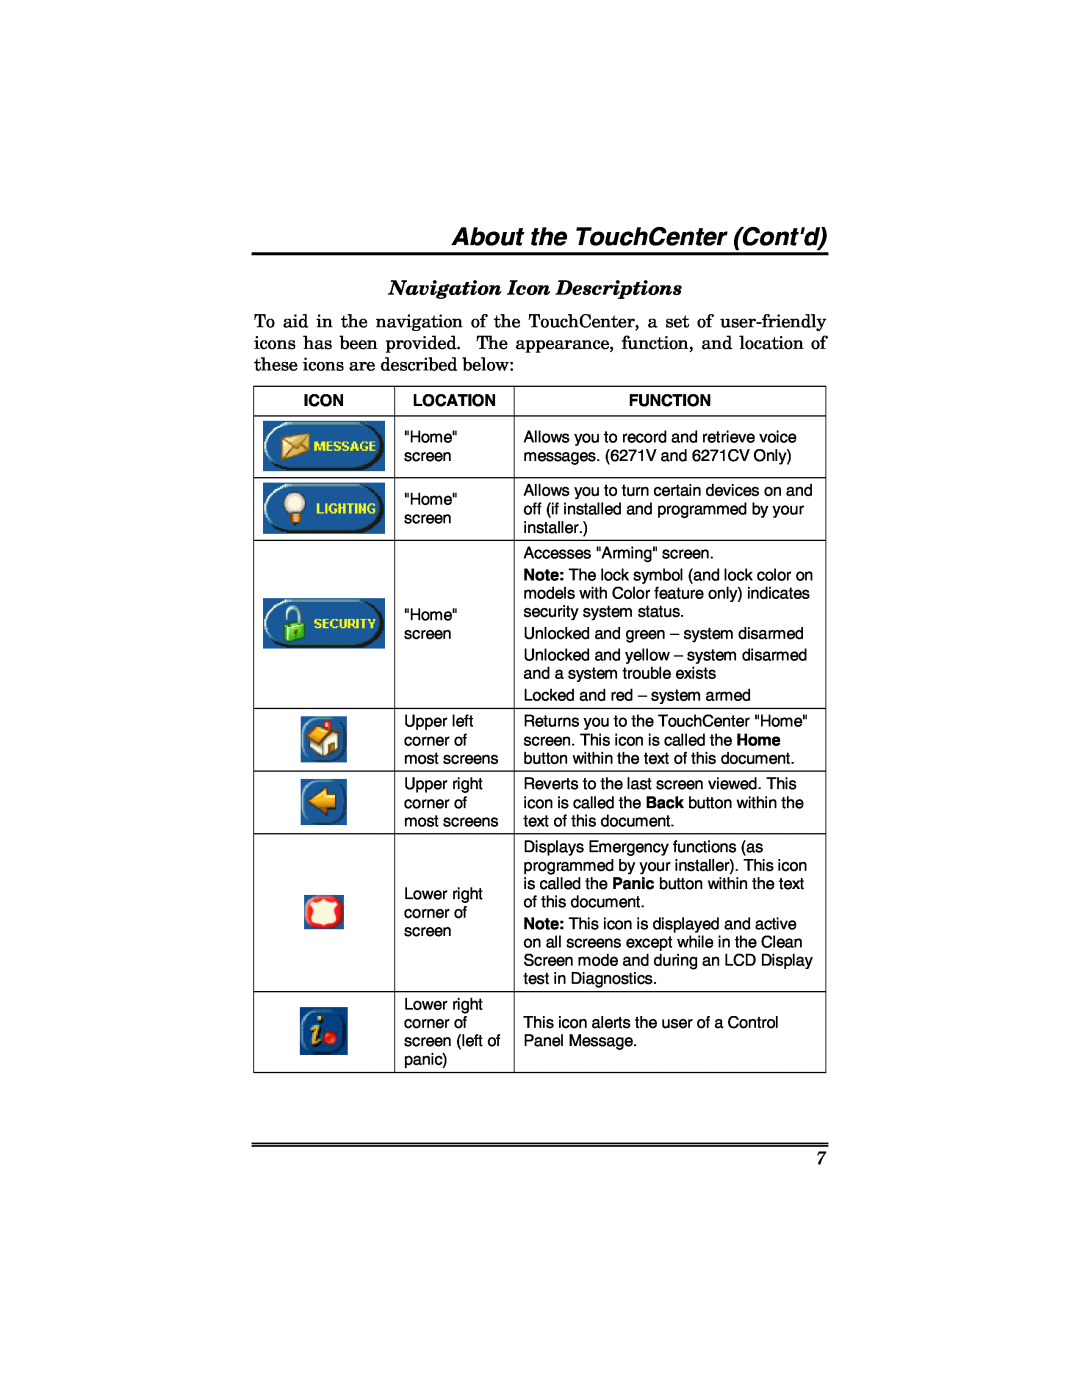 Honeywell 6271 manual About the TouchCenter Contd, Navigation Icon Descriptions, Location, Function 